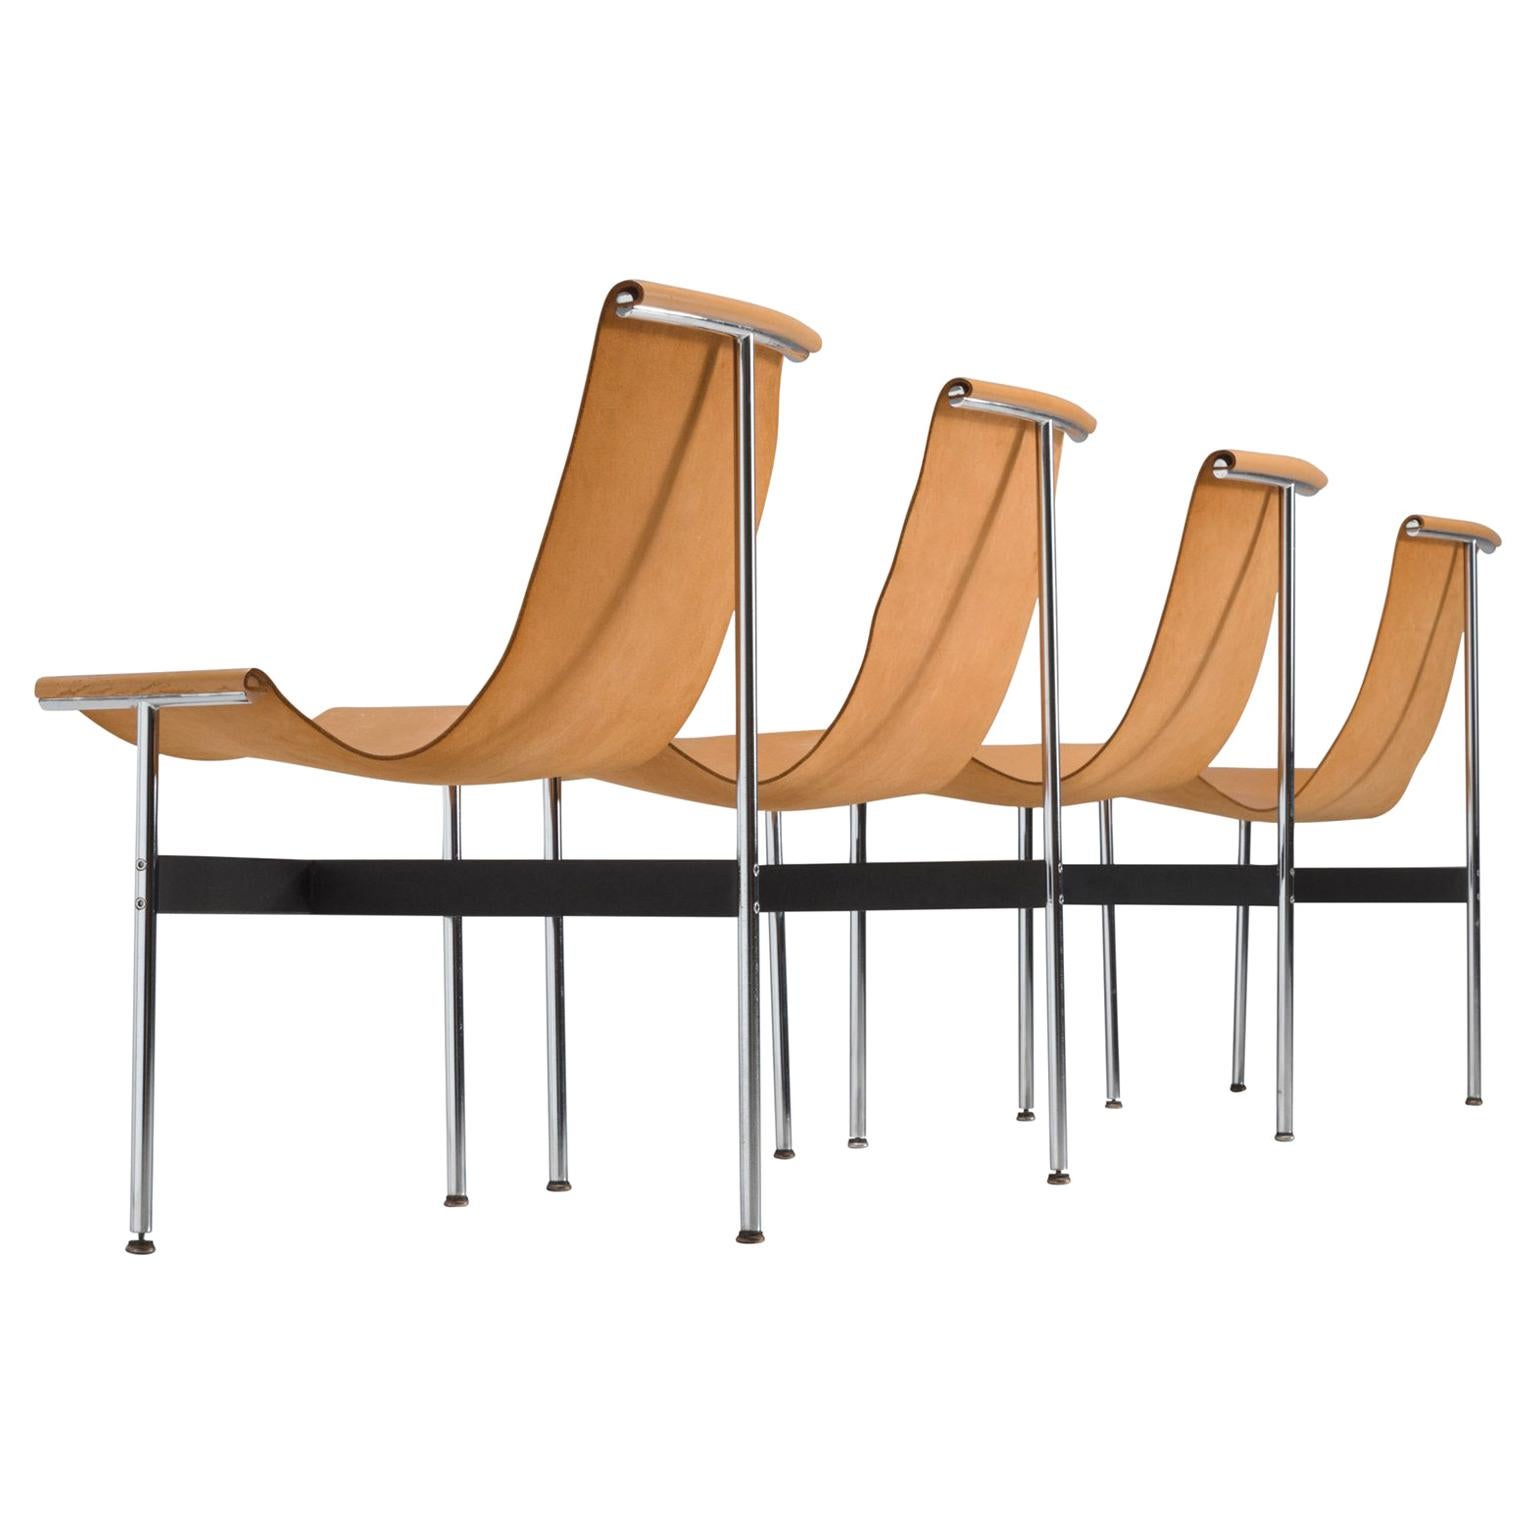 Katavolos, Kelley and Littell T-Chairs in Original Cognac Leather